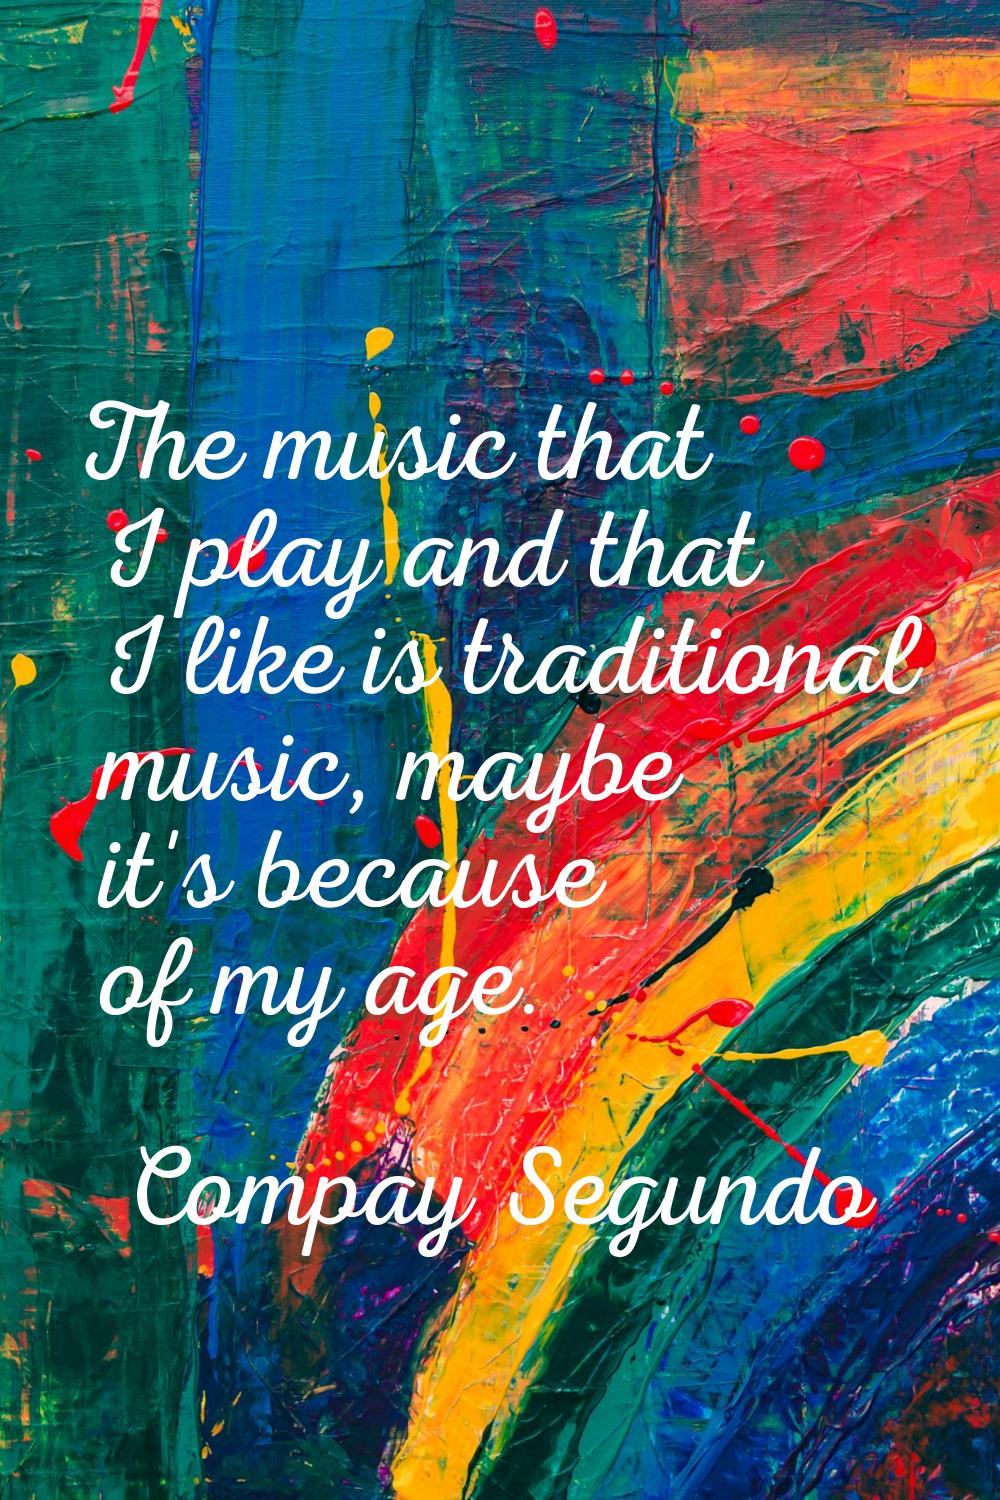 The music that I play and that I like is traditional music, maybe it's because of my age.